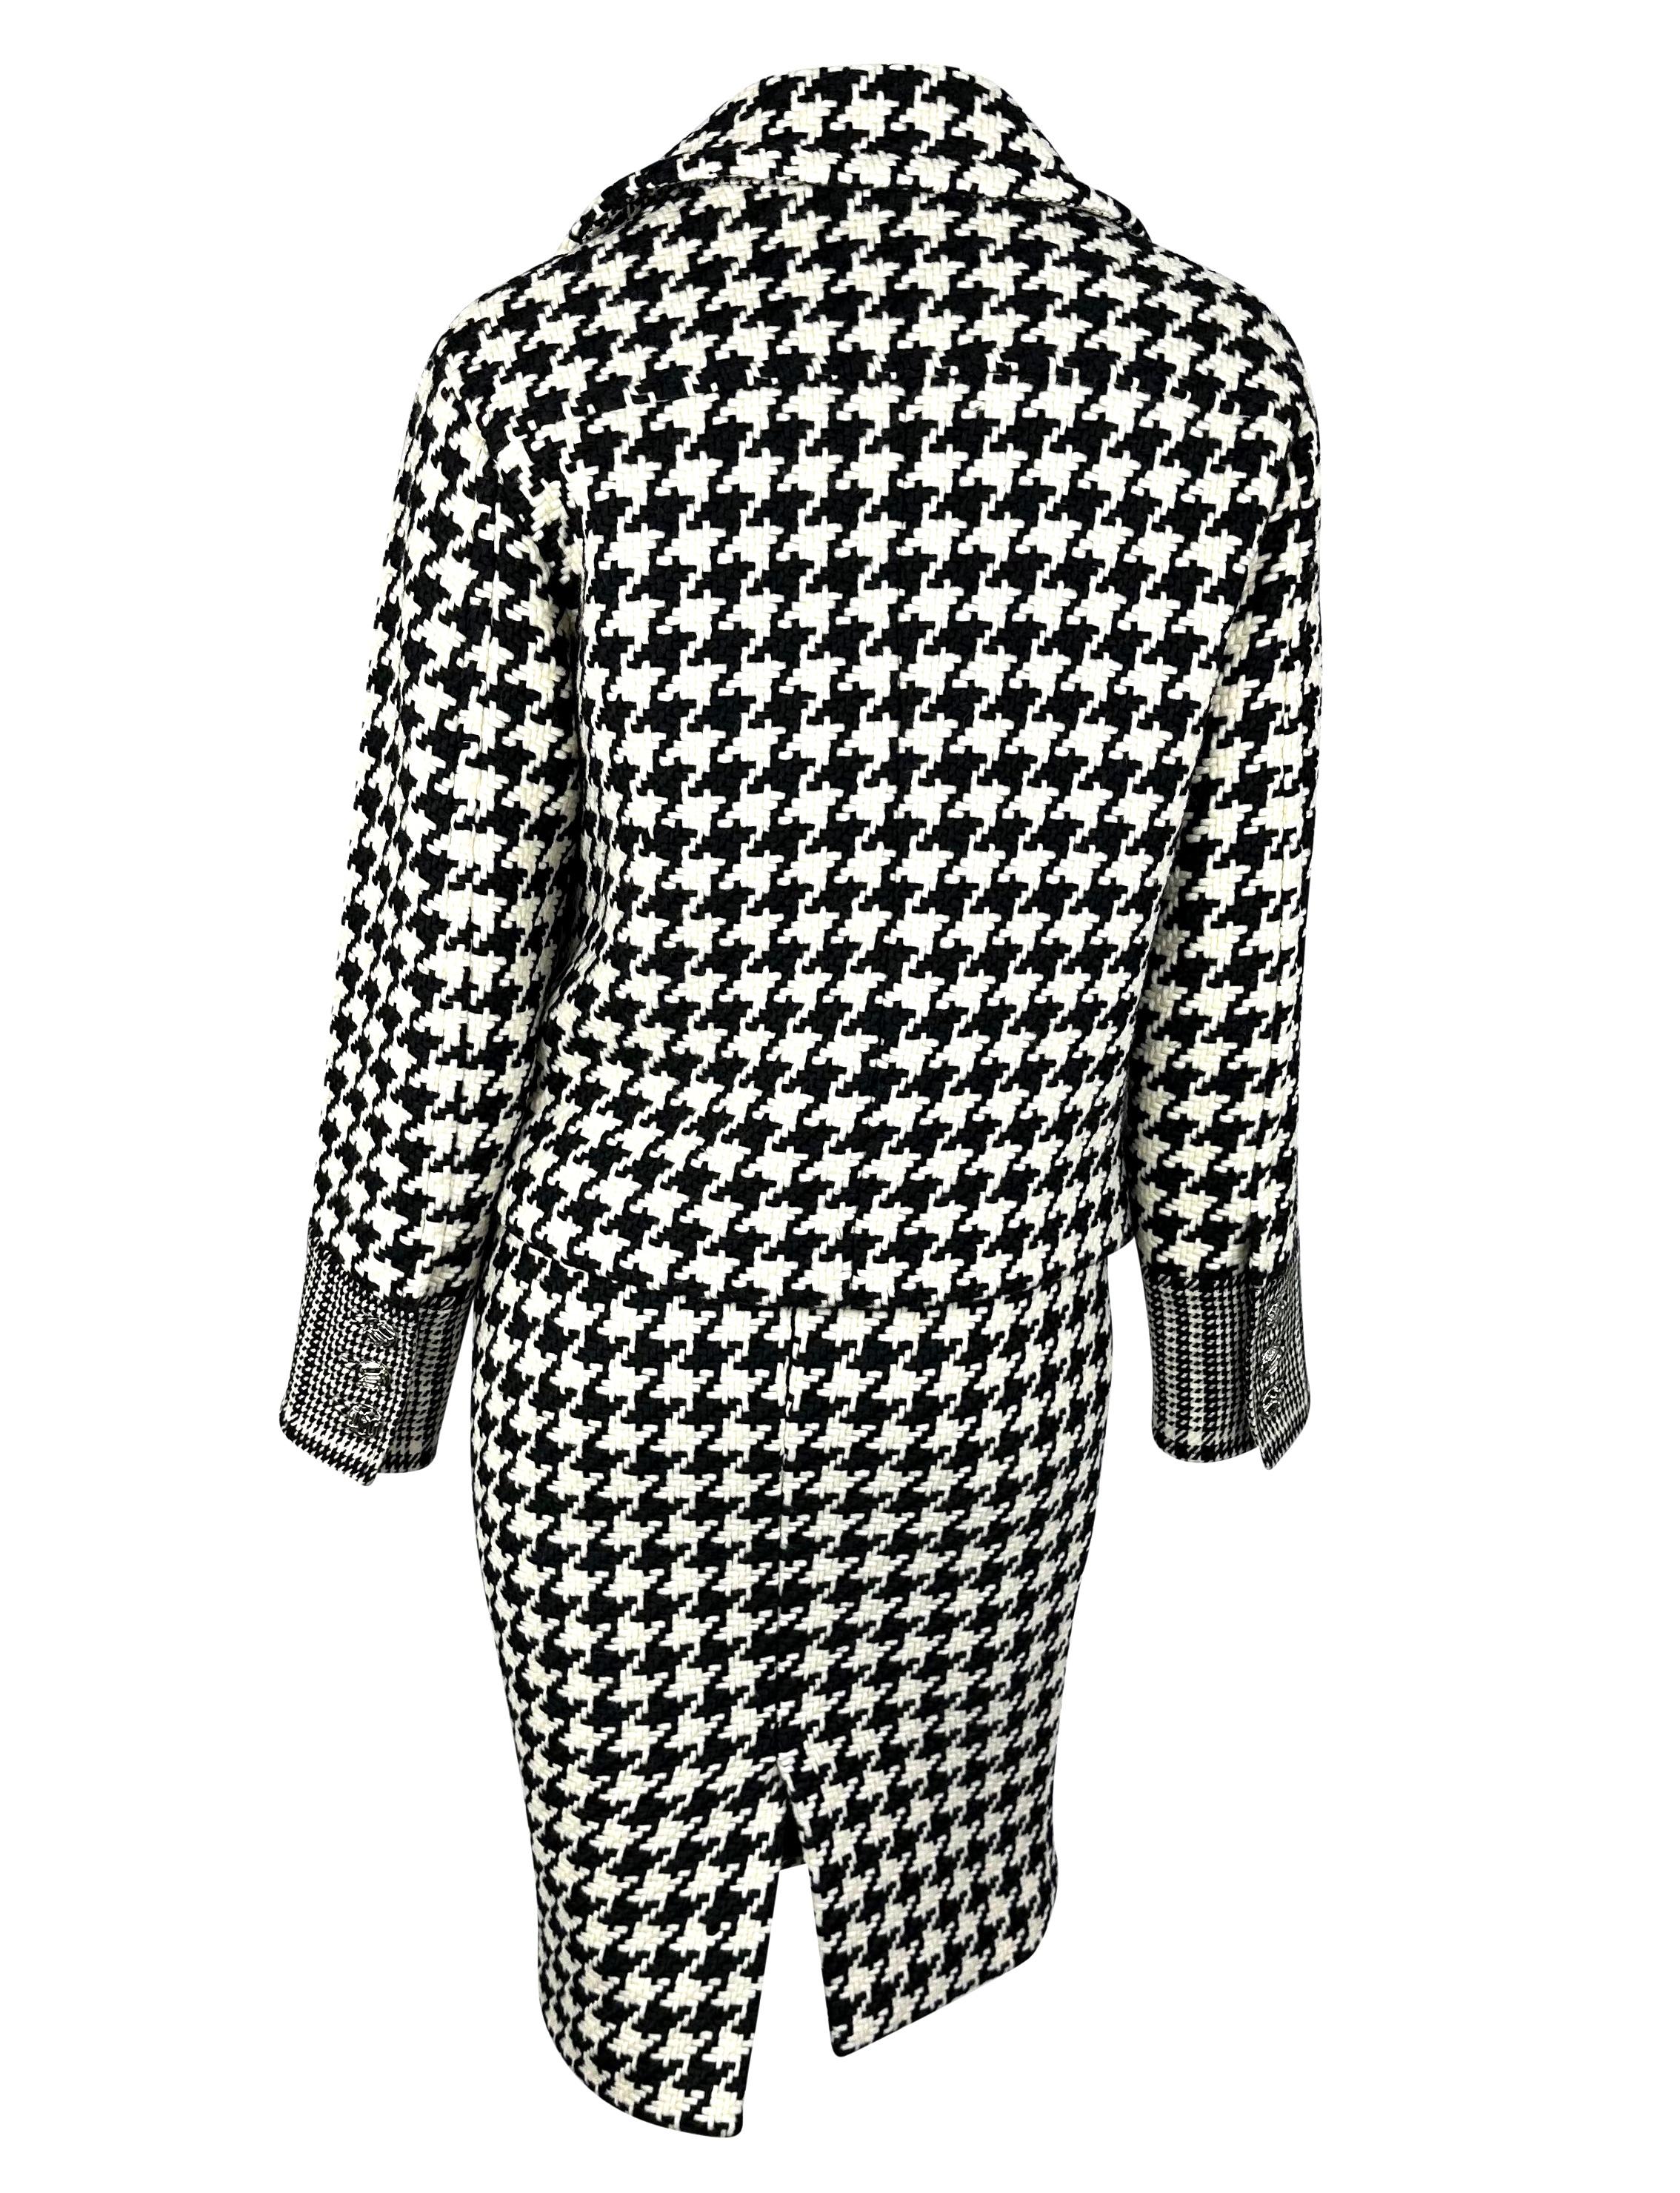 Women's F/W 2004 Versace by Donatella Runway Black White Tweed Houndstooth Skirt Suit For Sale